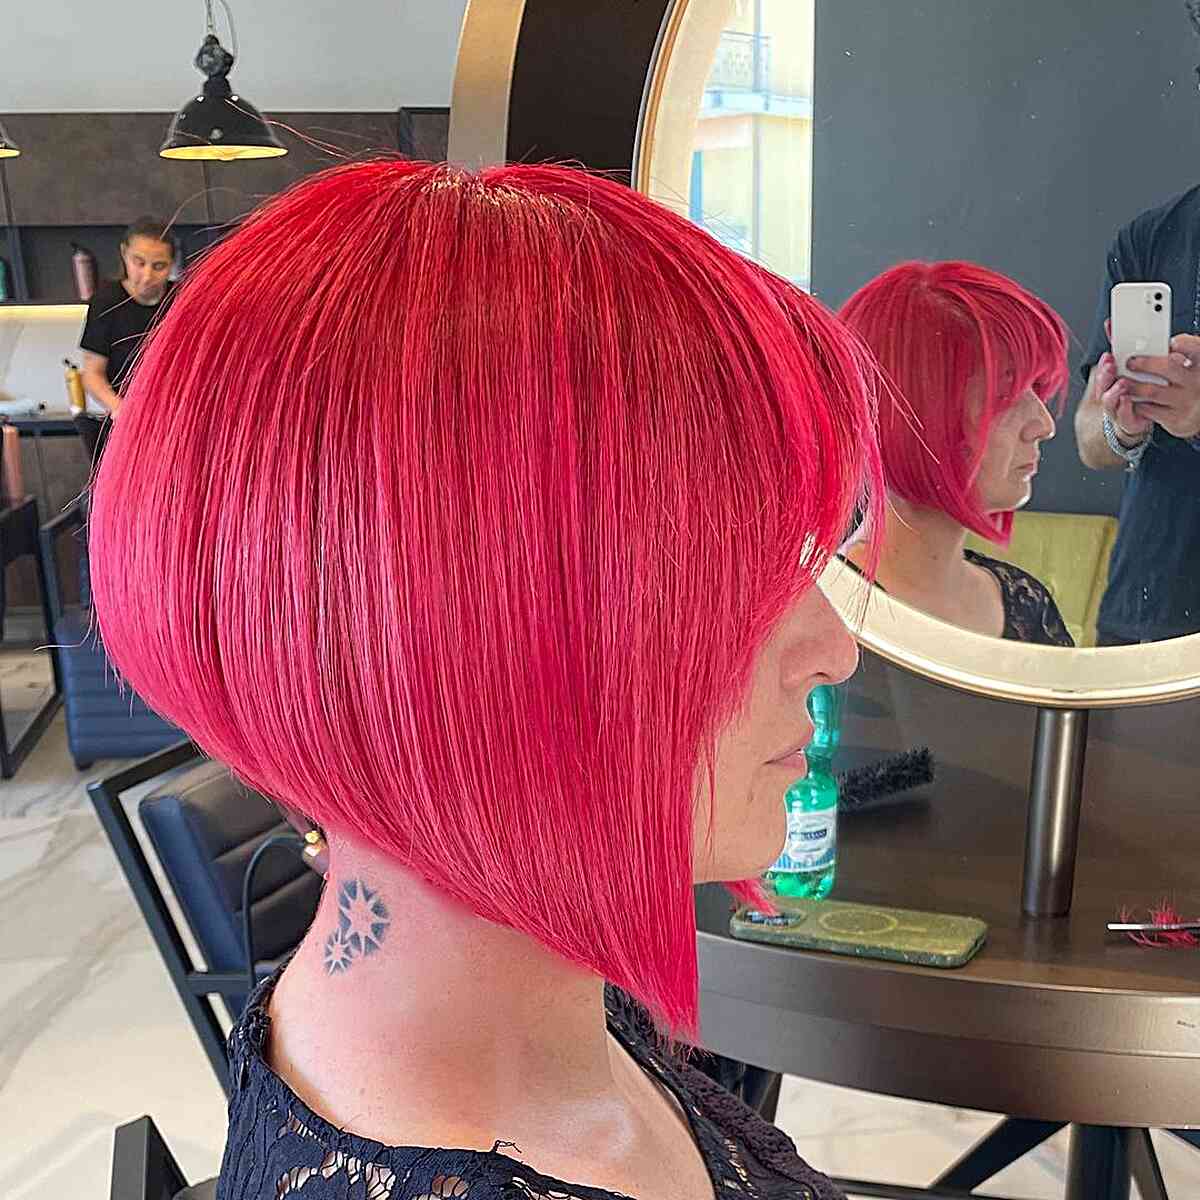 Short Stacked Bob with Amazing Red Coloring